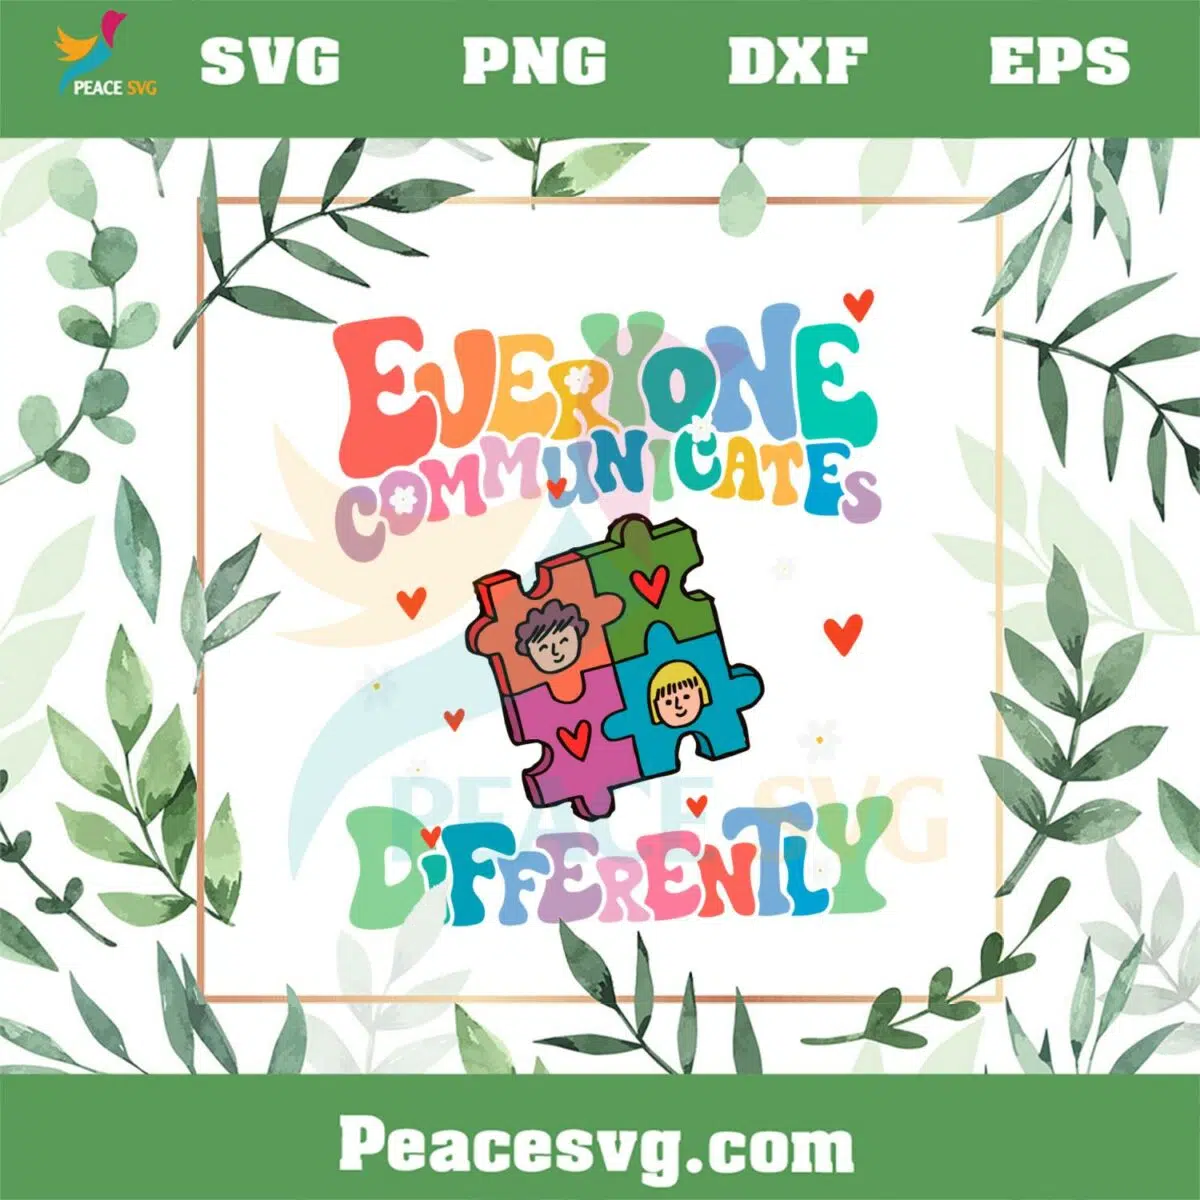 Everyone Communicate Differently SVG Autism Awareness SVG